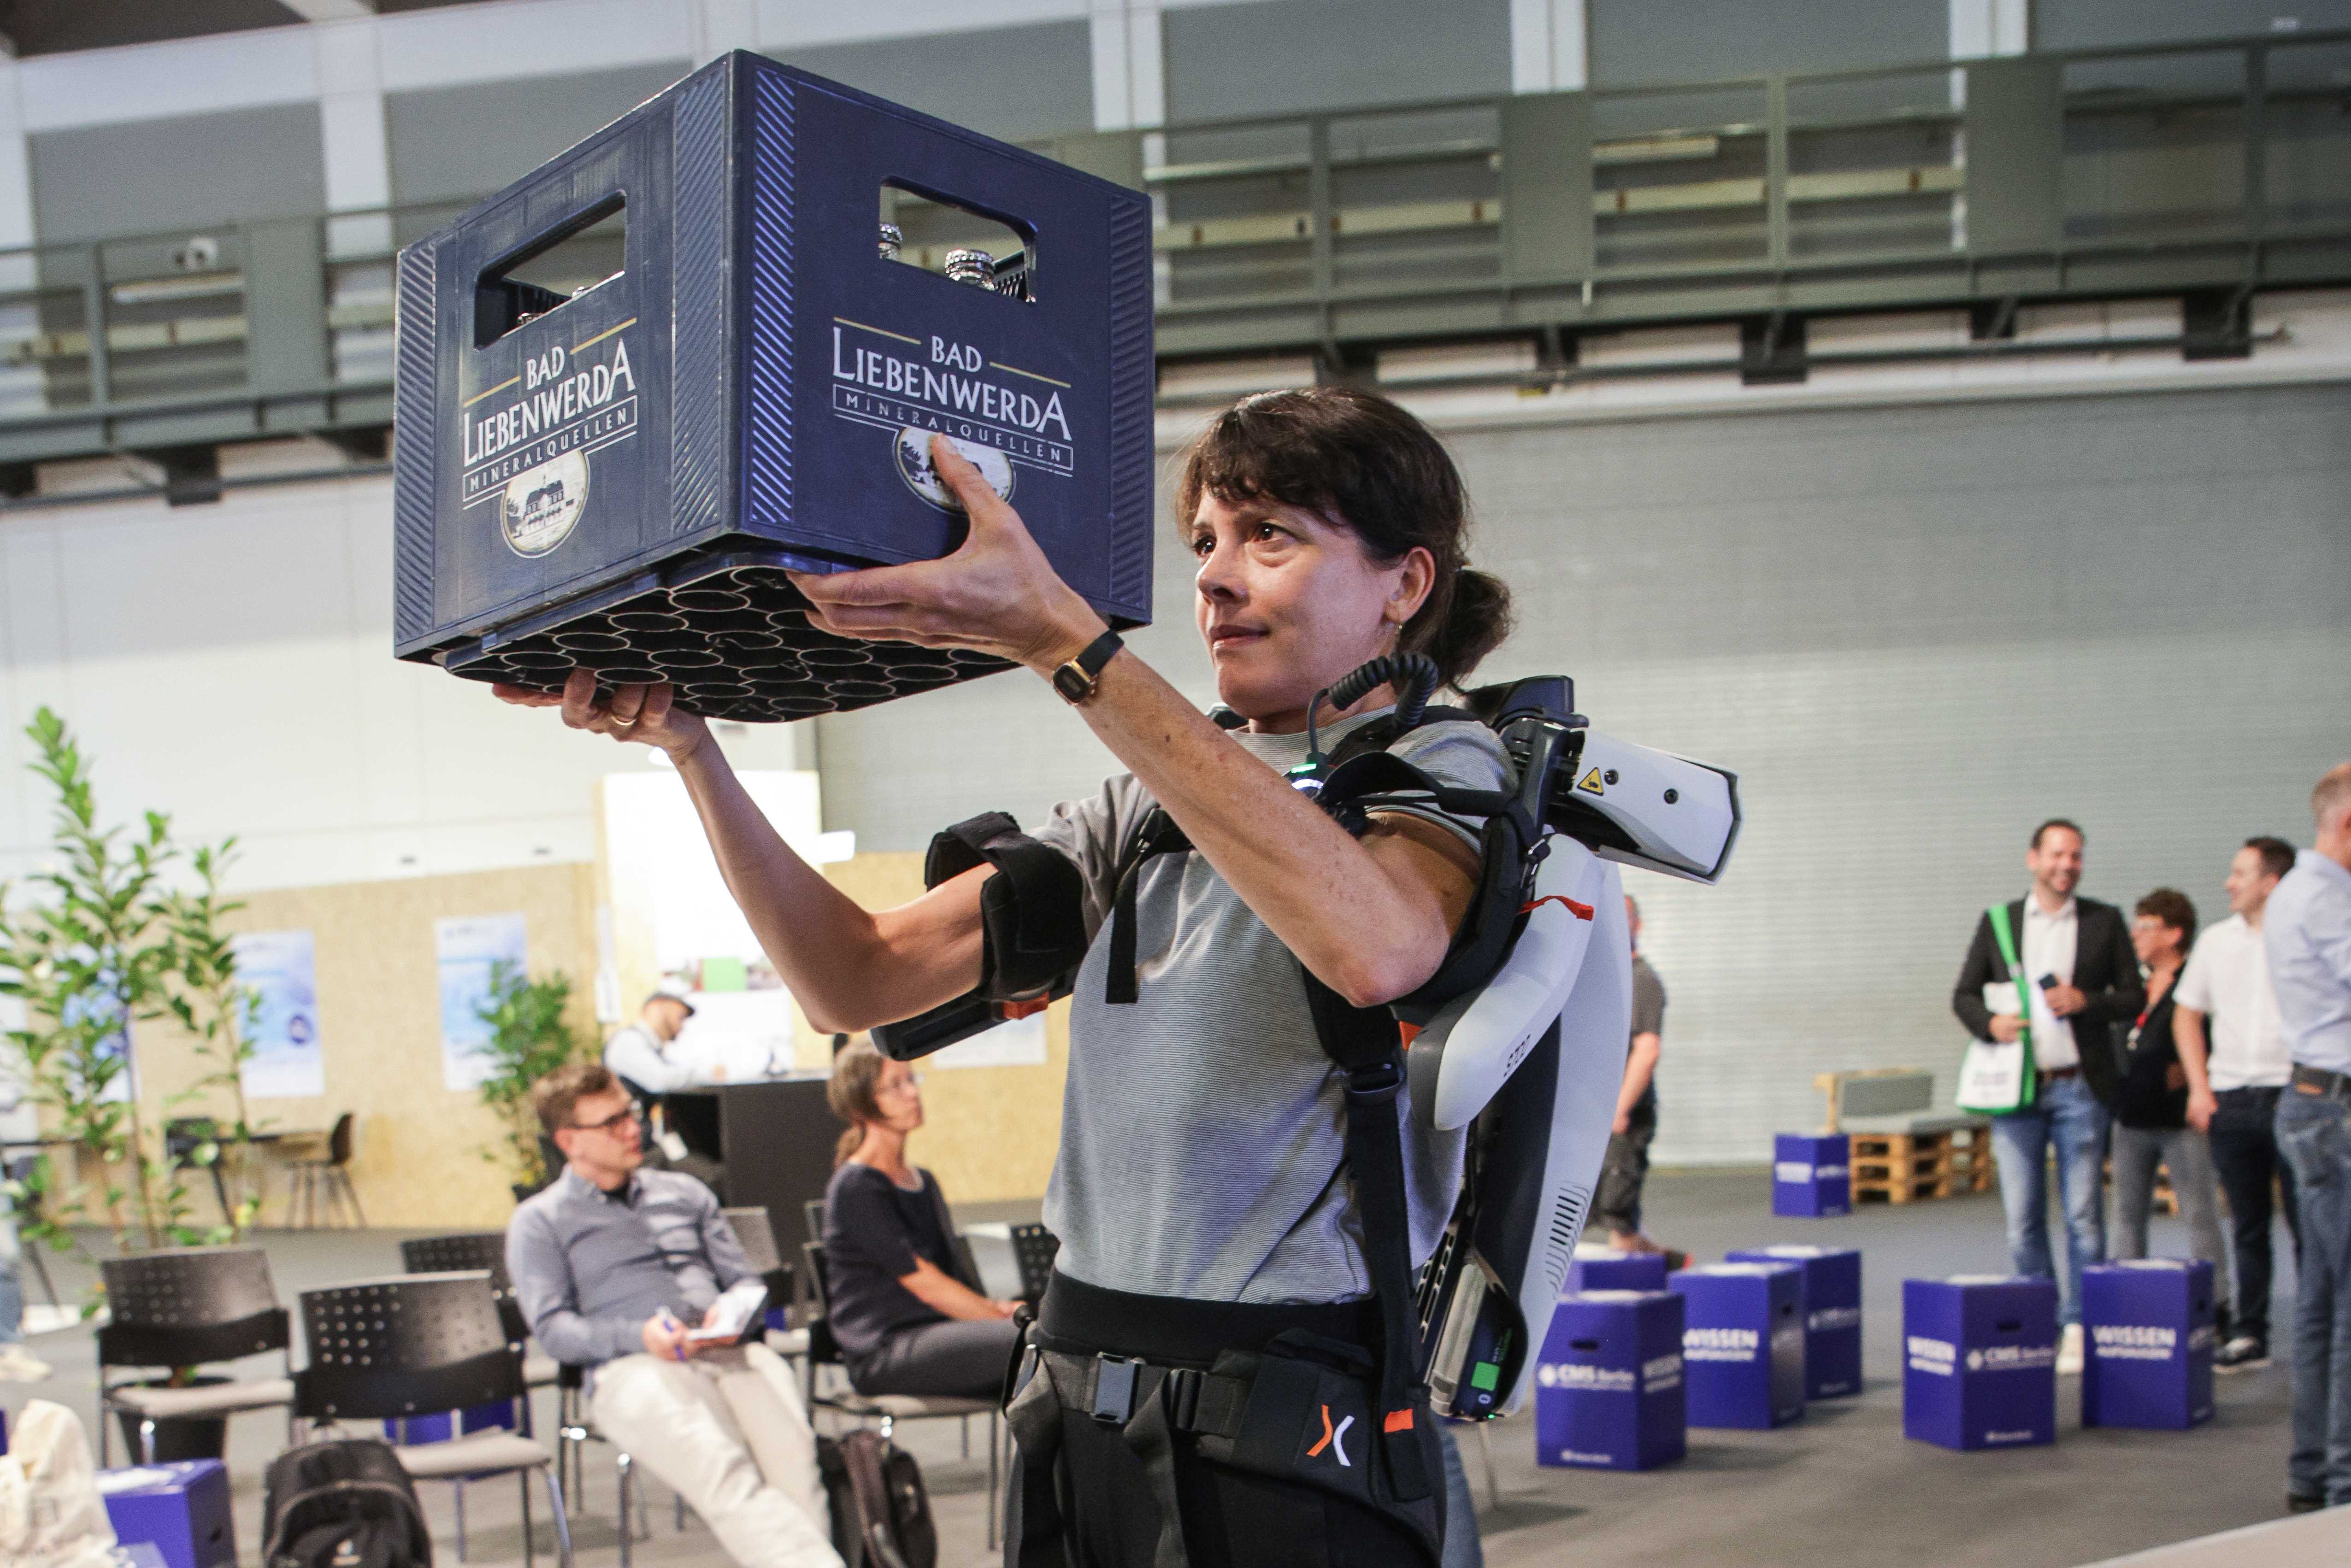 Self-test with the exoskeleton at CMS Berlin